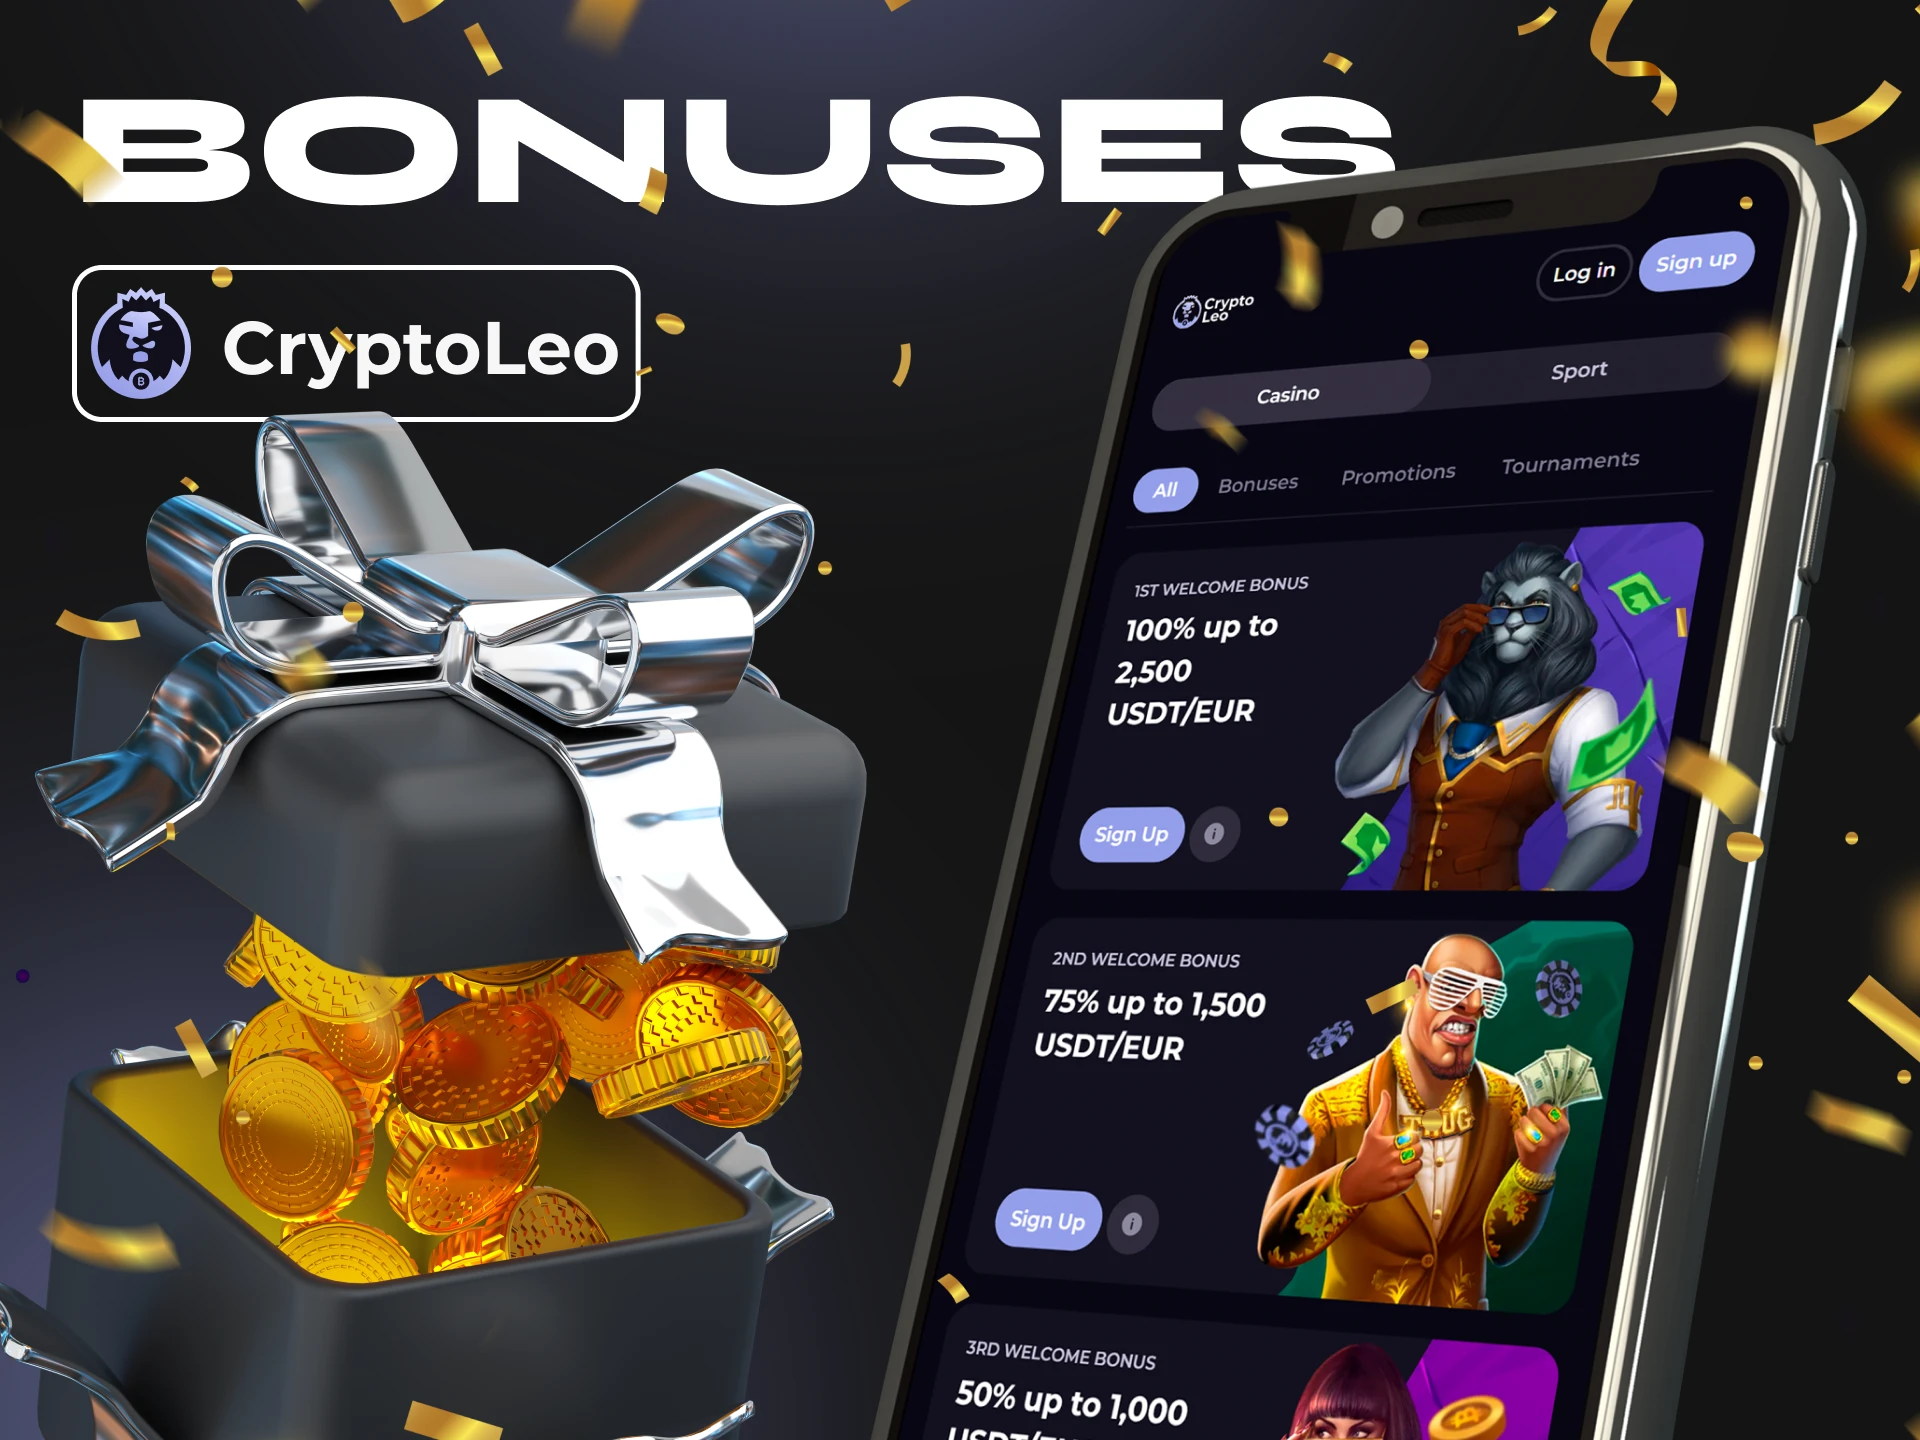 Cryptoleo always has a lot of different bonuses for every taste.